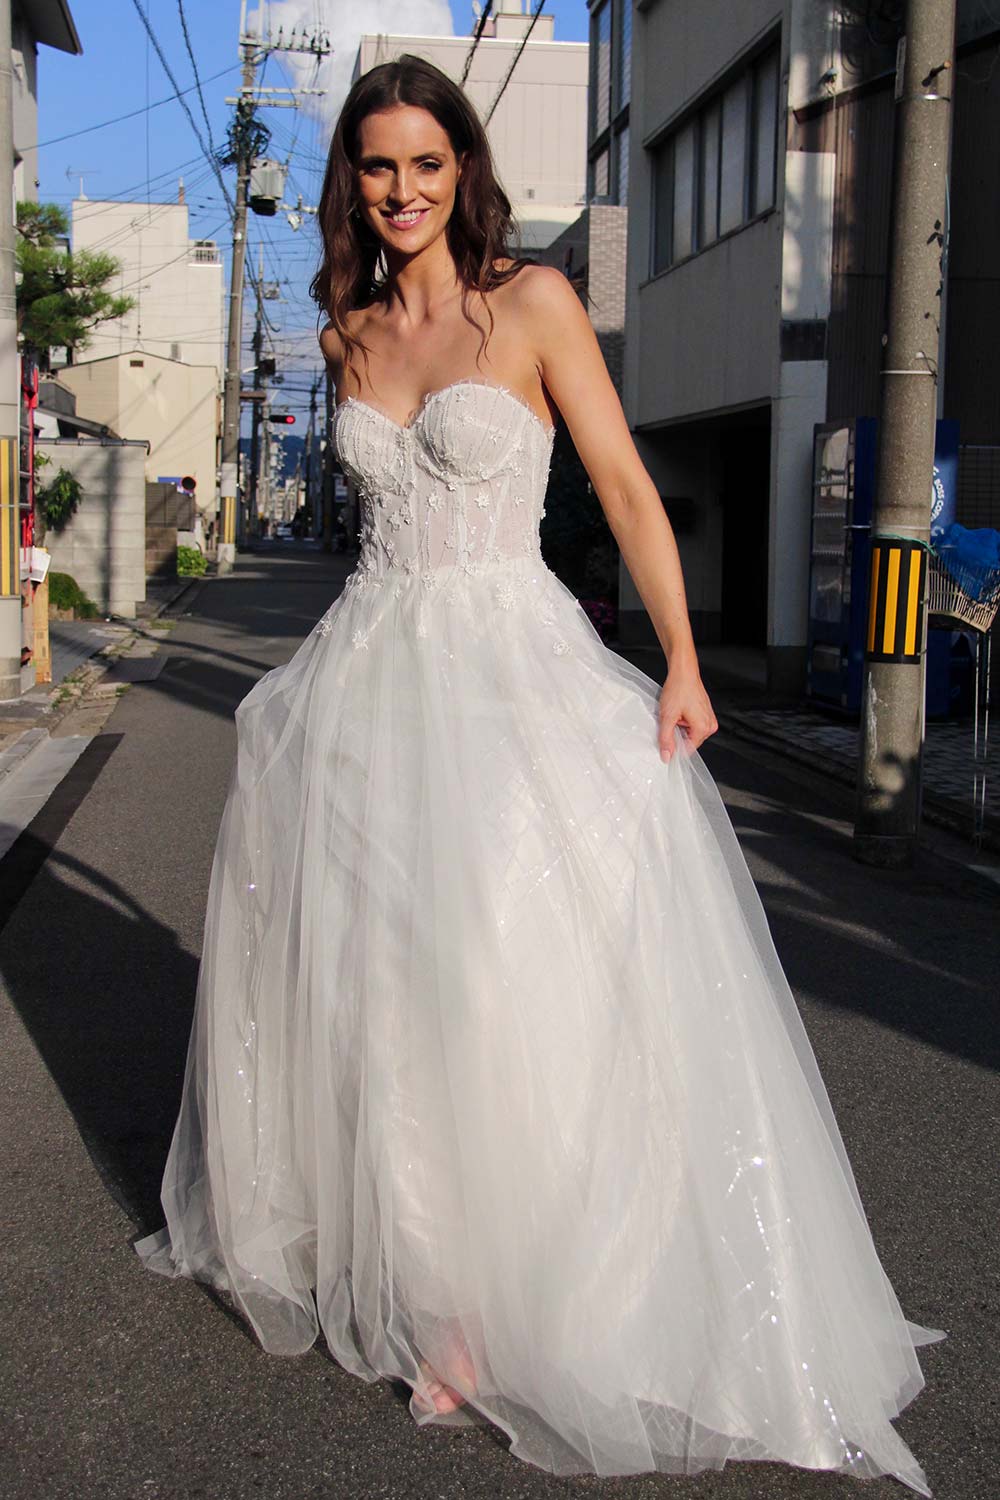 Female model wearing Vinka Design An Oriental Affair Wedding Dress. On a japanese street the front detail of a semi-sheer bodice with boning and hand-appliqued lace and skirt made with multiple layers of tulle